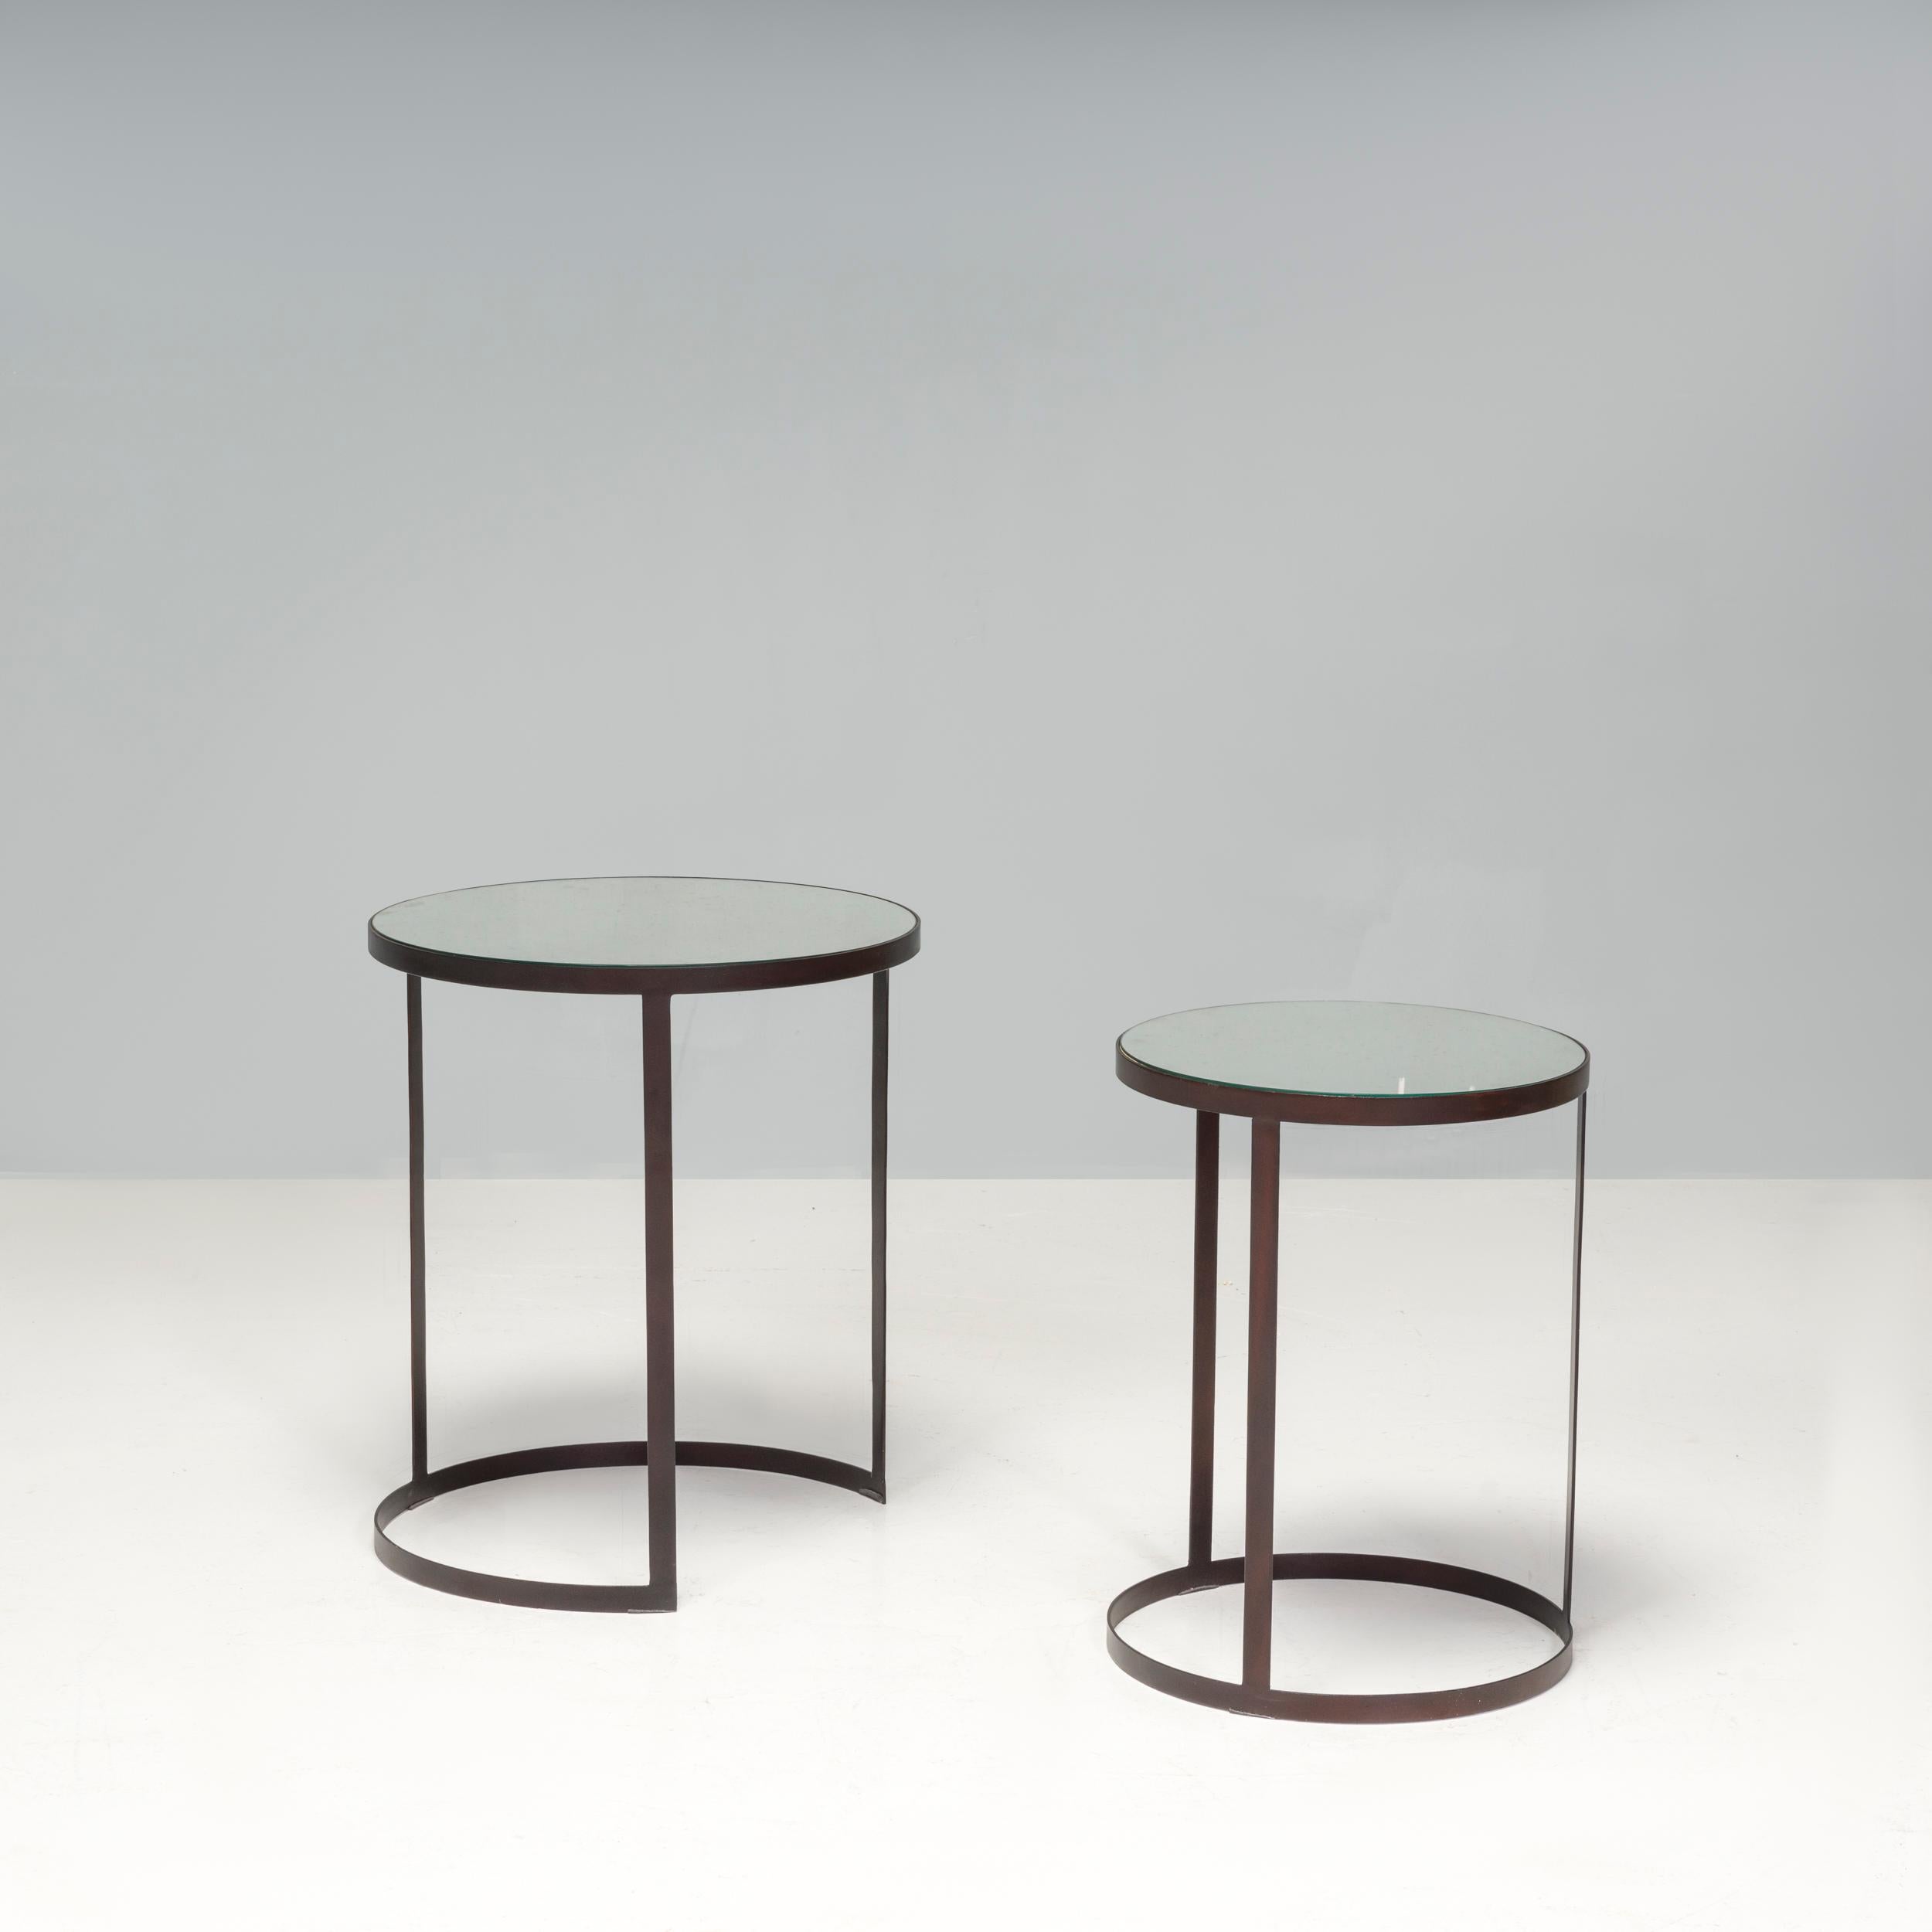 The 'Song' is a pair of matching side tables from Liang & Eimil that fuse mid-century functionality with contemporary style.

Their design is sleekly modern with mirrored tops and slender steel legs with a delightfully glamorous aged brass finish.